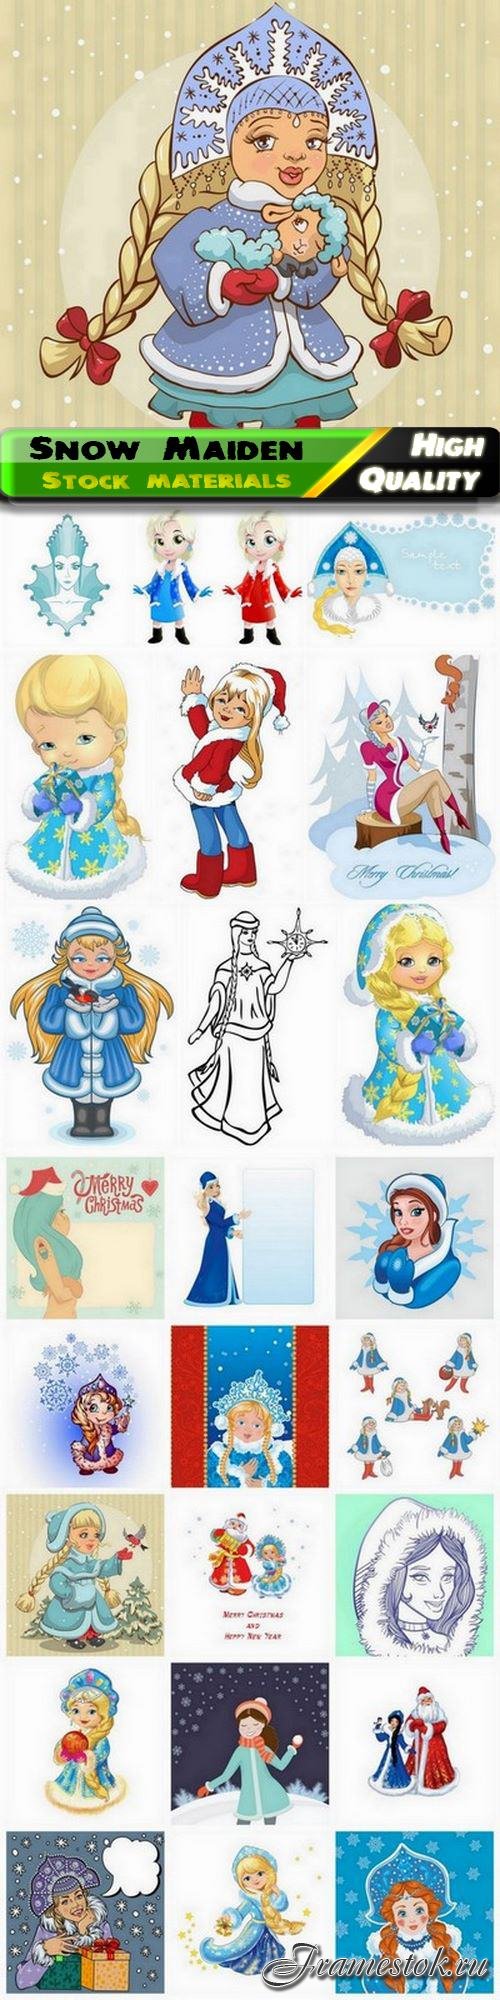 Snow Maiden and Santa Claus for Merry Christmas card - 25 Eps